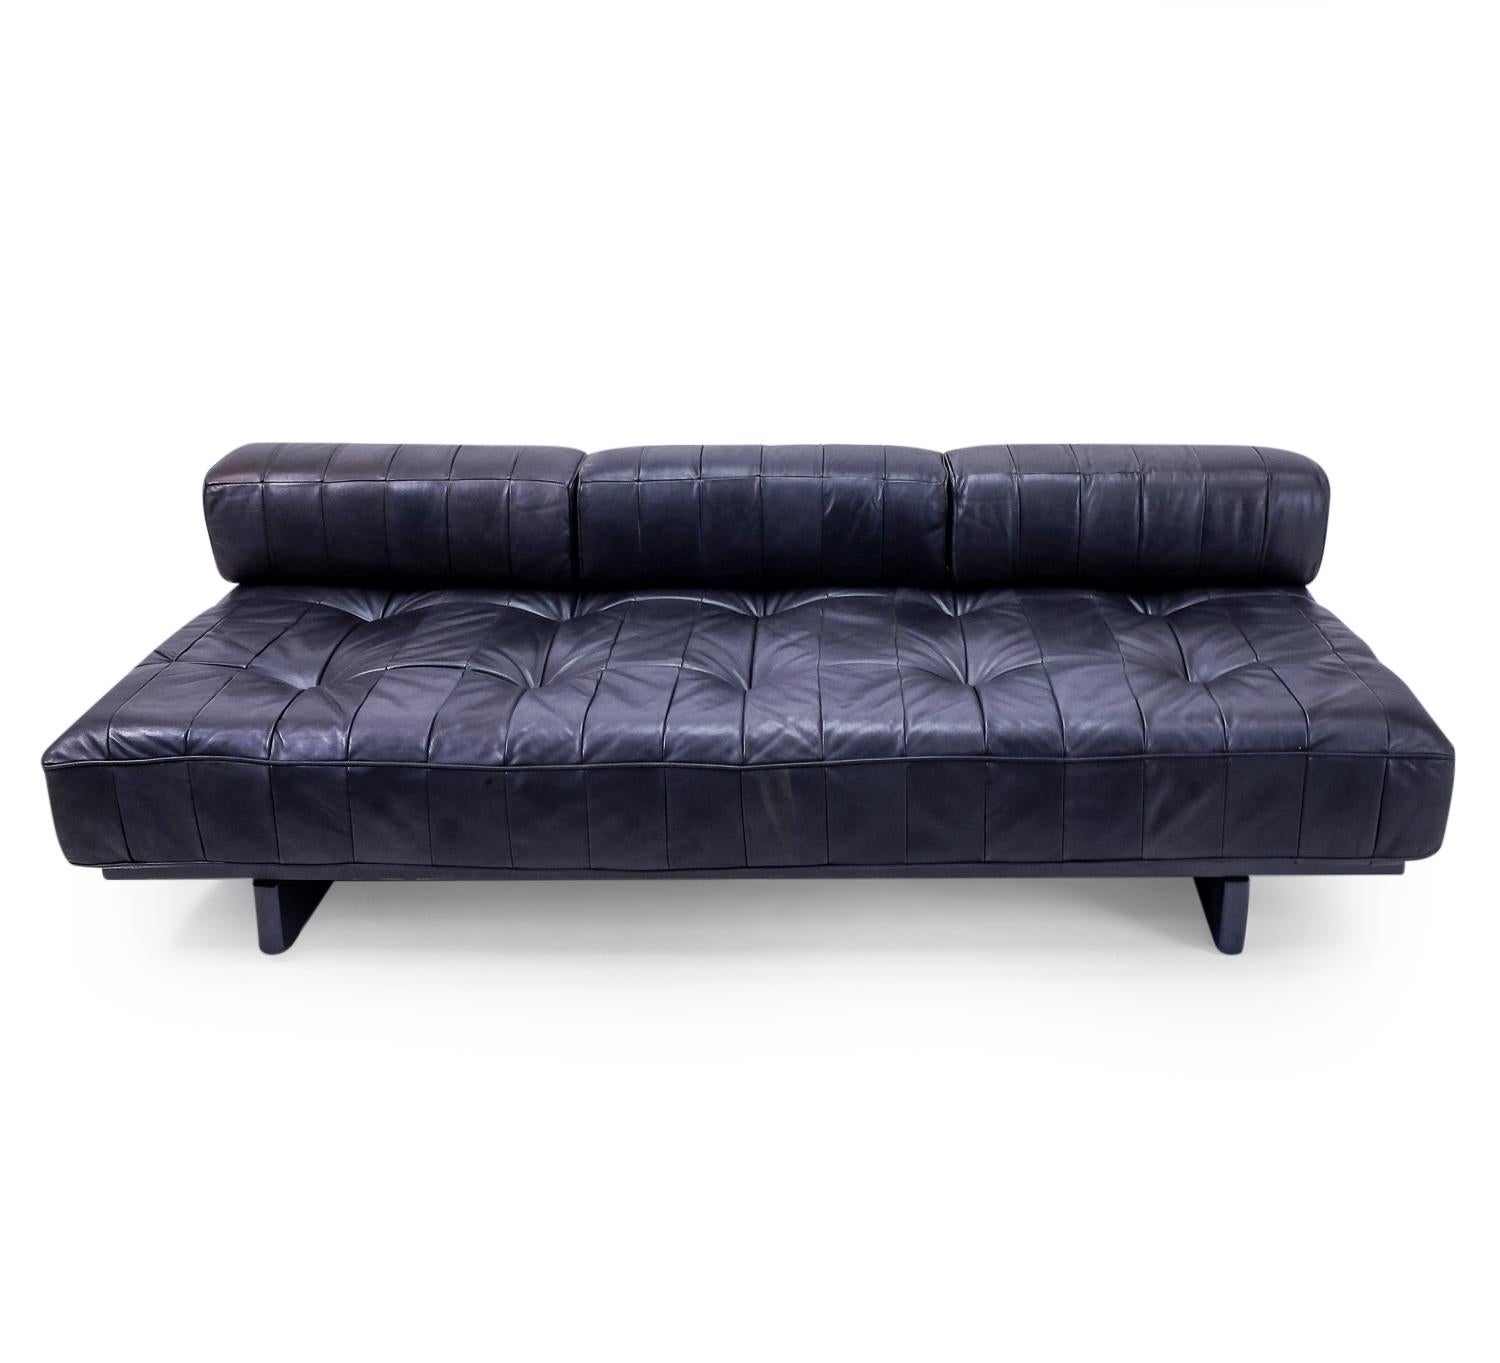 De Sede Daybed model DS 80 in a nice patined black leather, featuring 3 pillows. We have the same daybed available with an additional pillow.

The leather is a patchwork design made from black pigmented aniline leather, which typically gives a